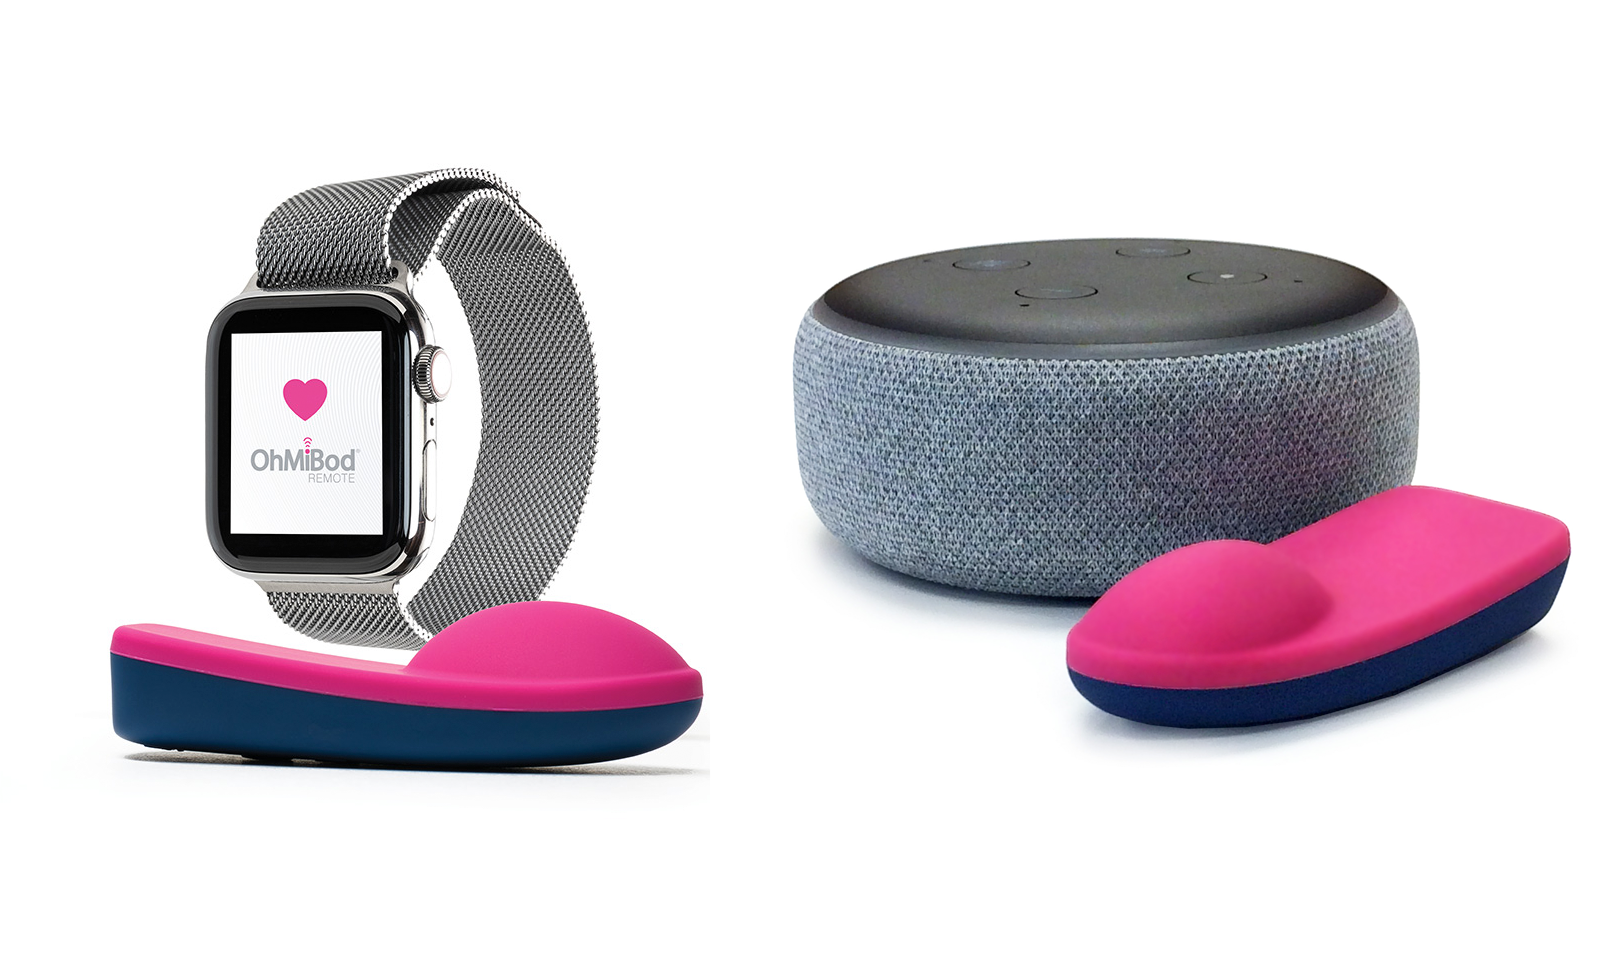 OhMiBod at CES 2019 to Debut Remote Intimacy App For Apple Watch